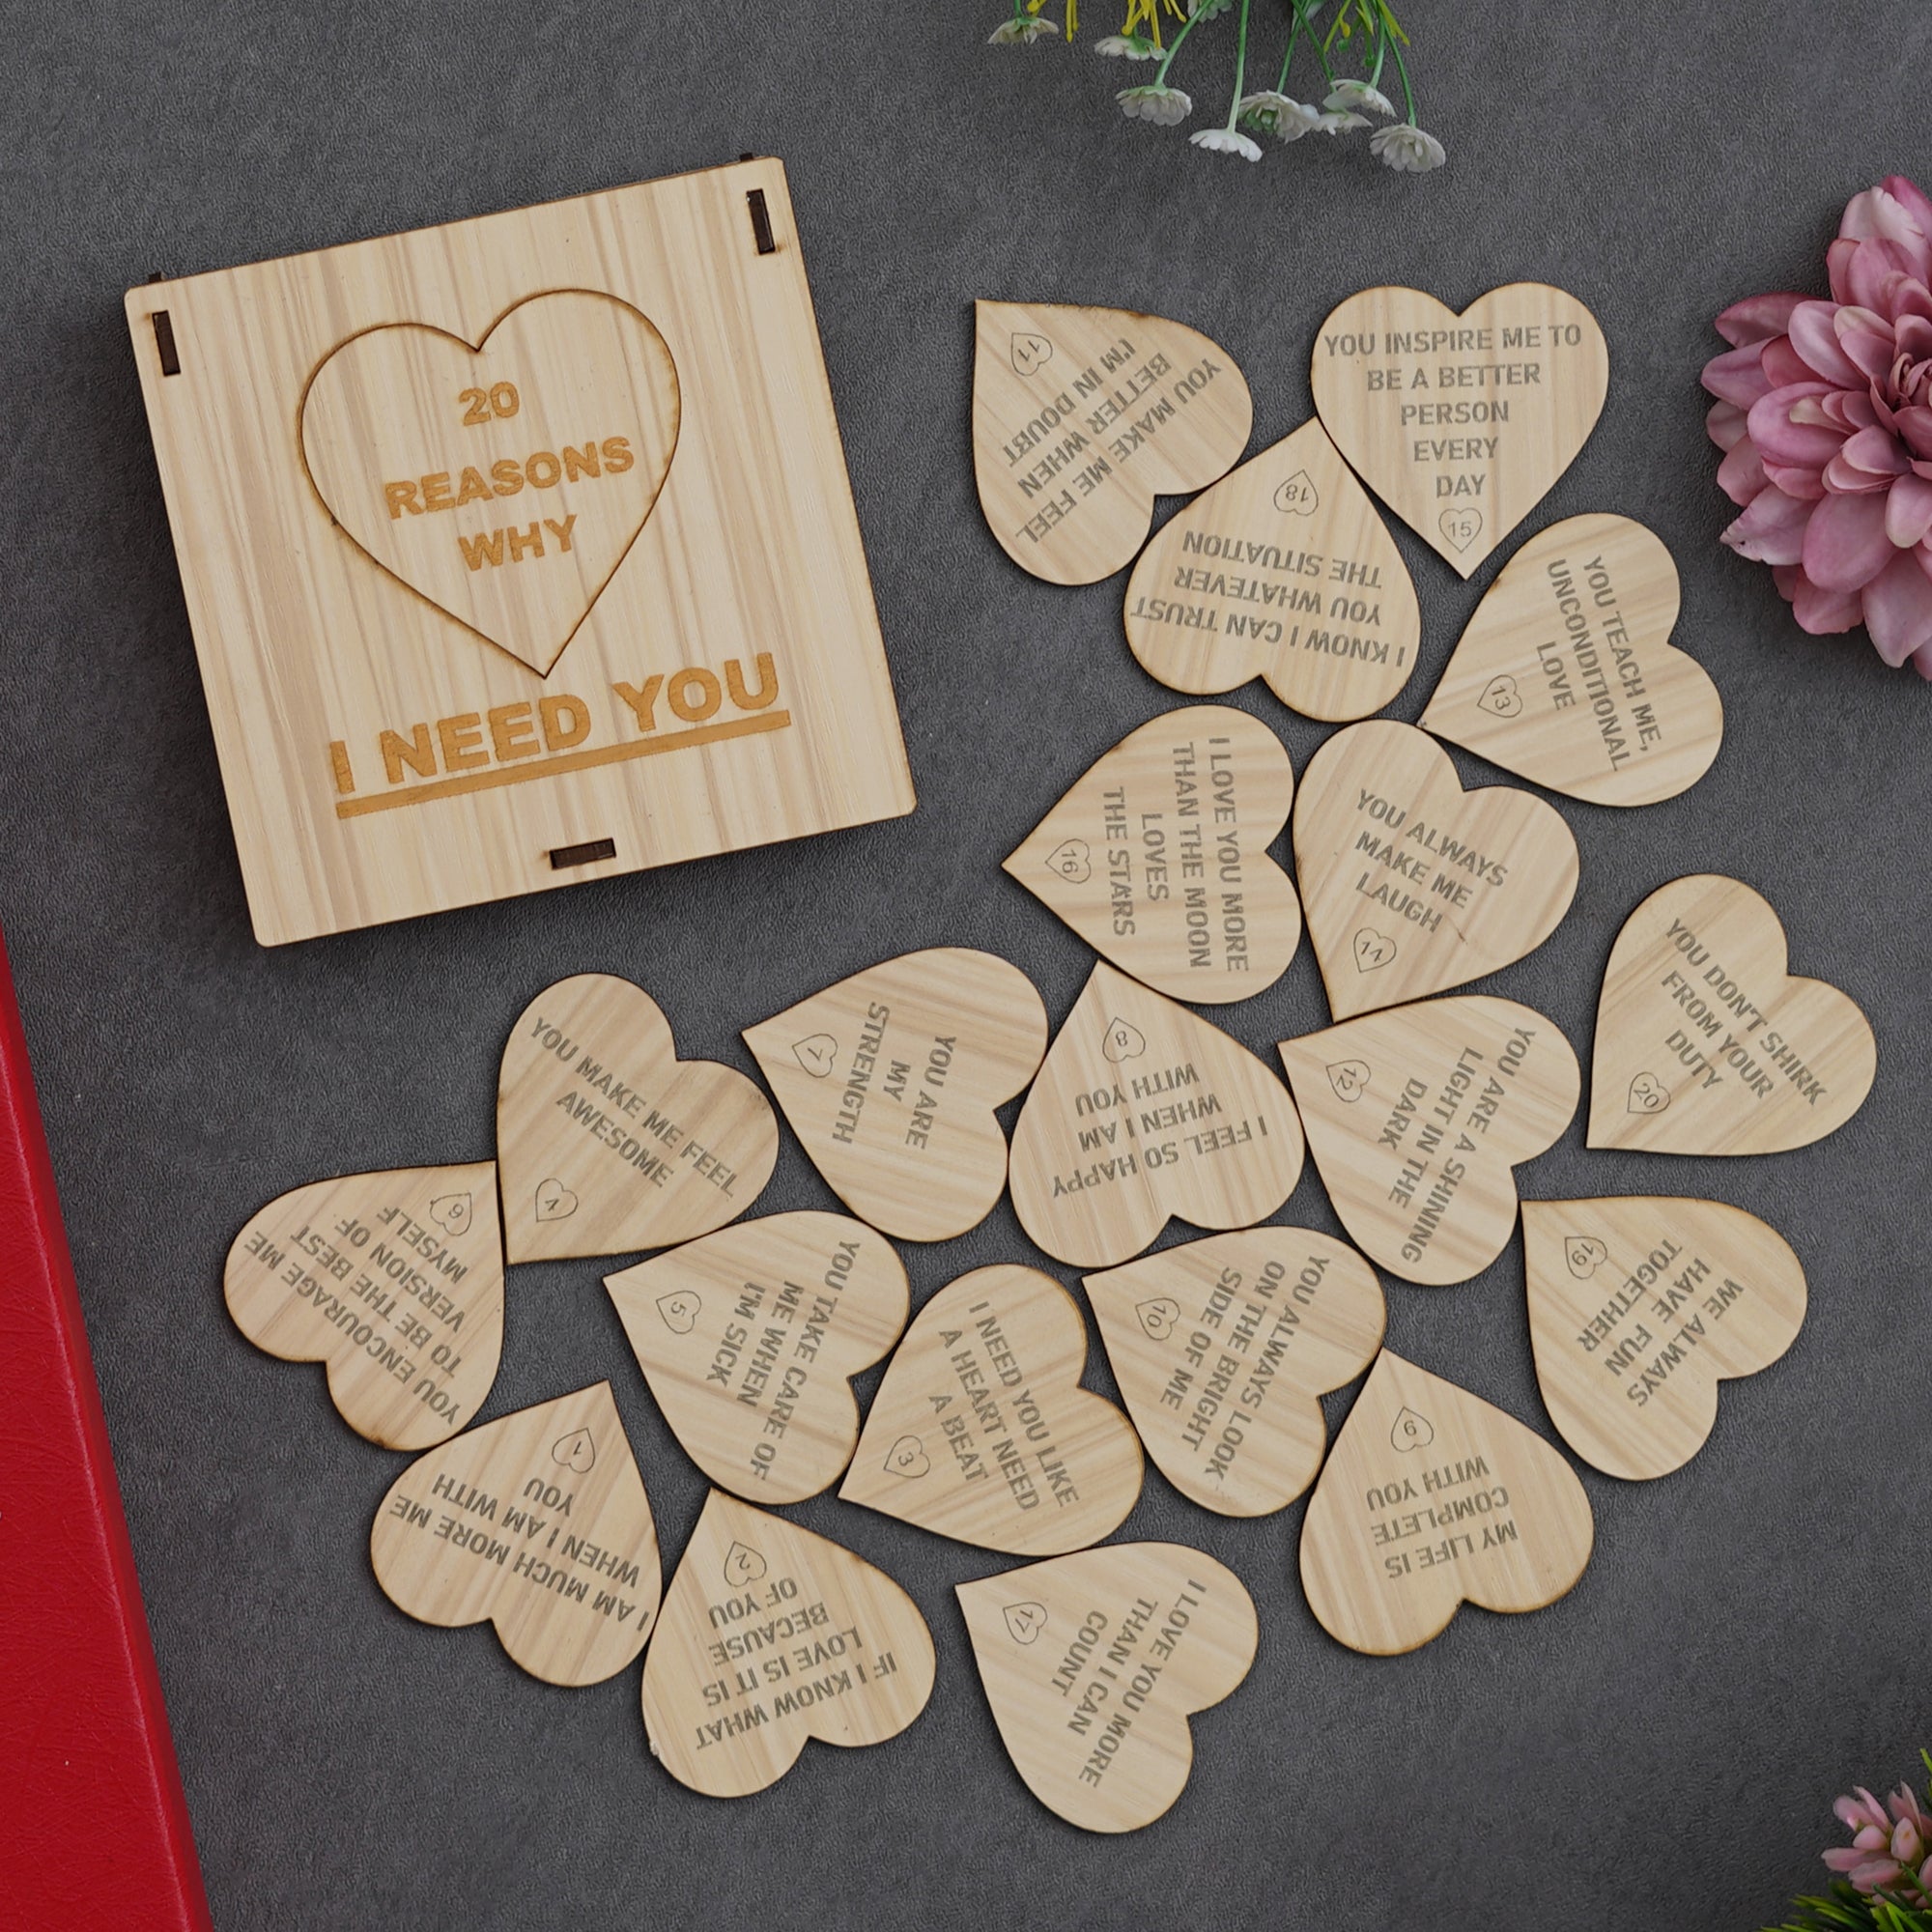 Valentine Combo of Pack of 12 Love Coupons Gift Cards Set, Red Gift Box with Teddy & Roses, "20 Reasons Why I Need You" Printed on Little Hearts Wooden Gift Set 5